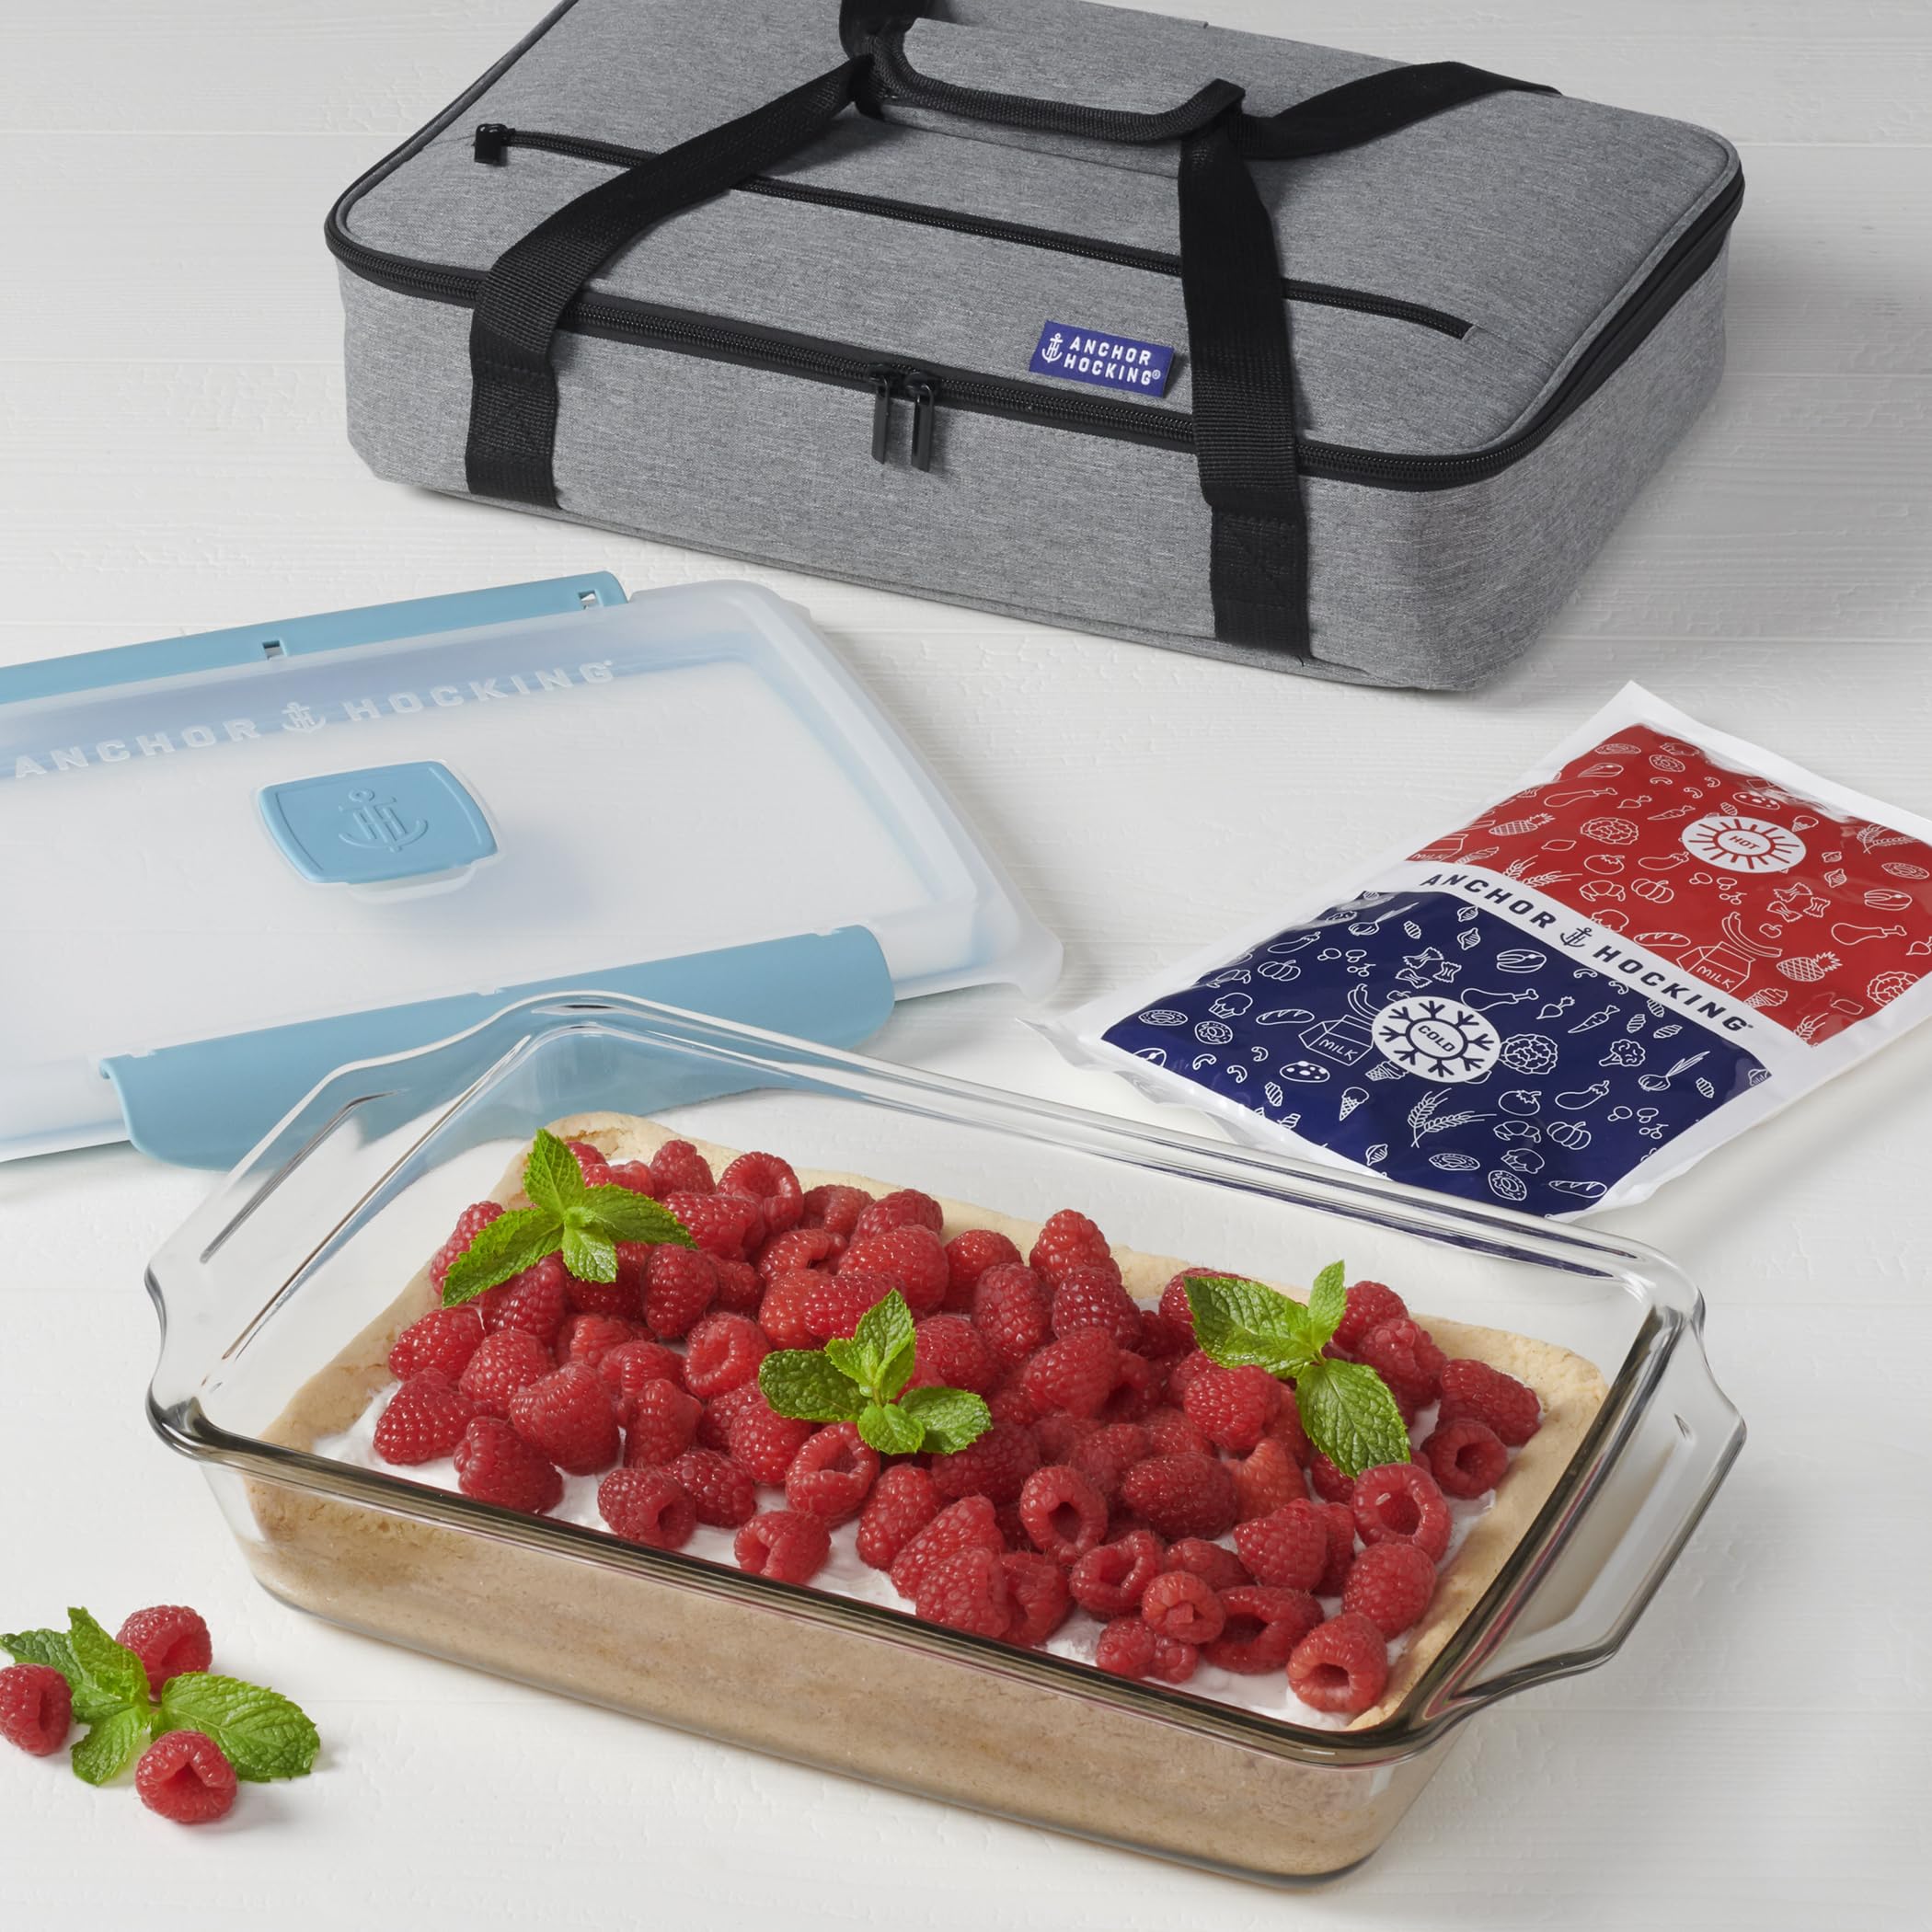 Anchor Hocking 3 Quart Glass Baking Dish with Lid, Insulated Carrier & Hot/Cold Pack